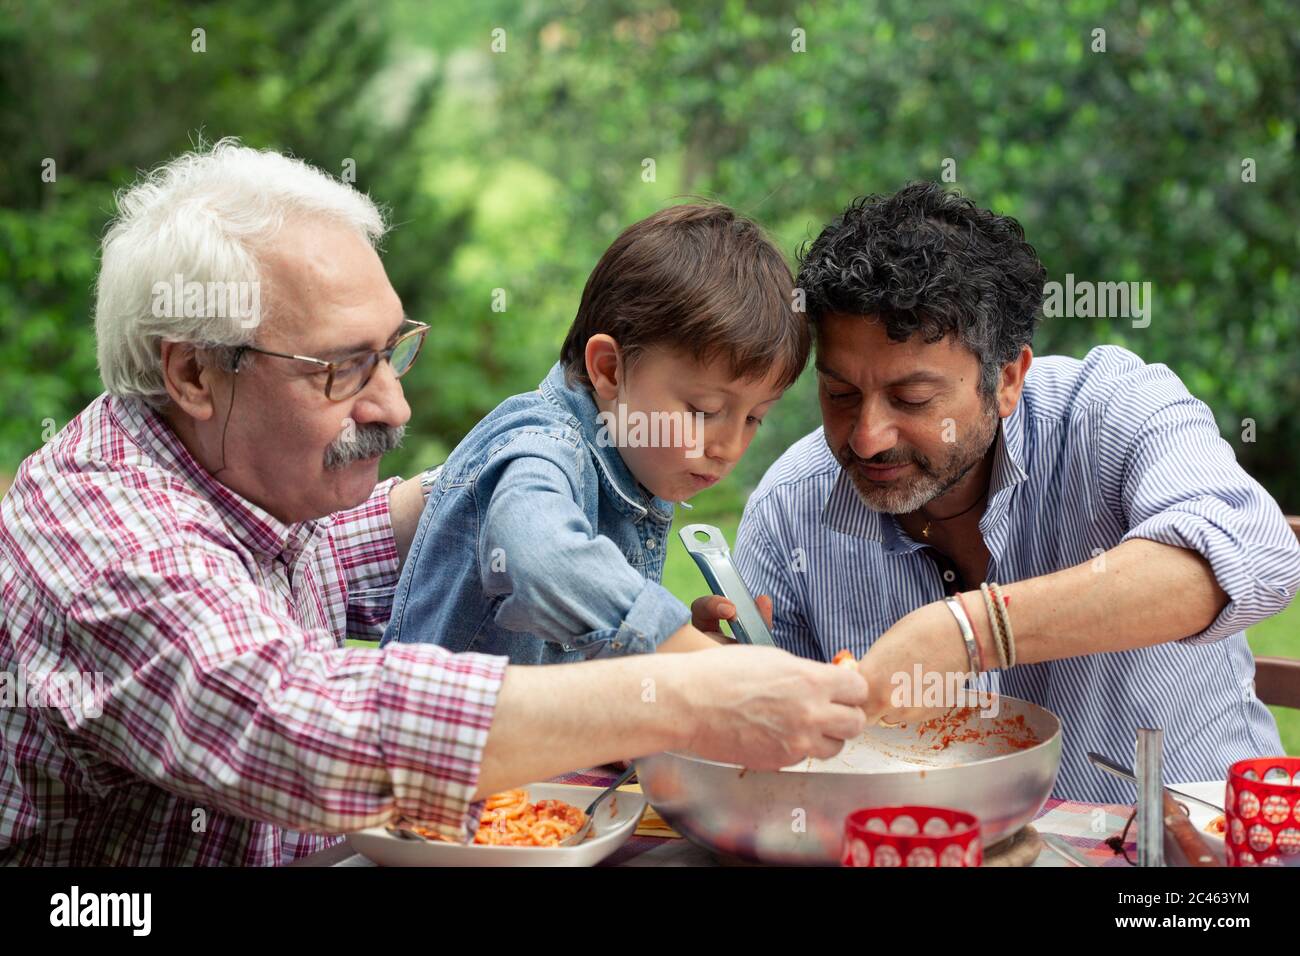 Three generations of male family enjoying a meal together Stock Photo